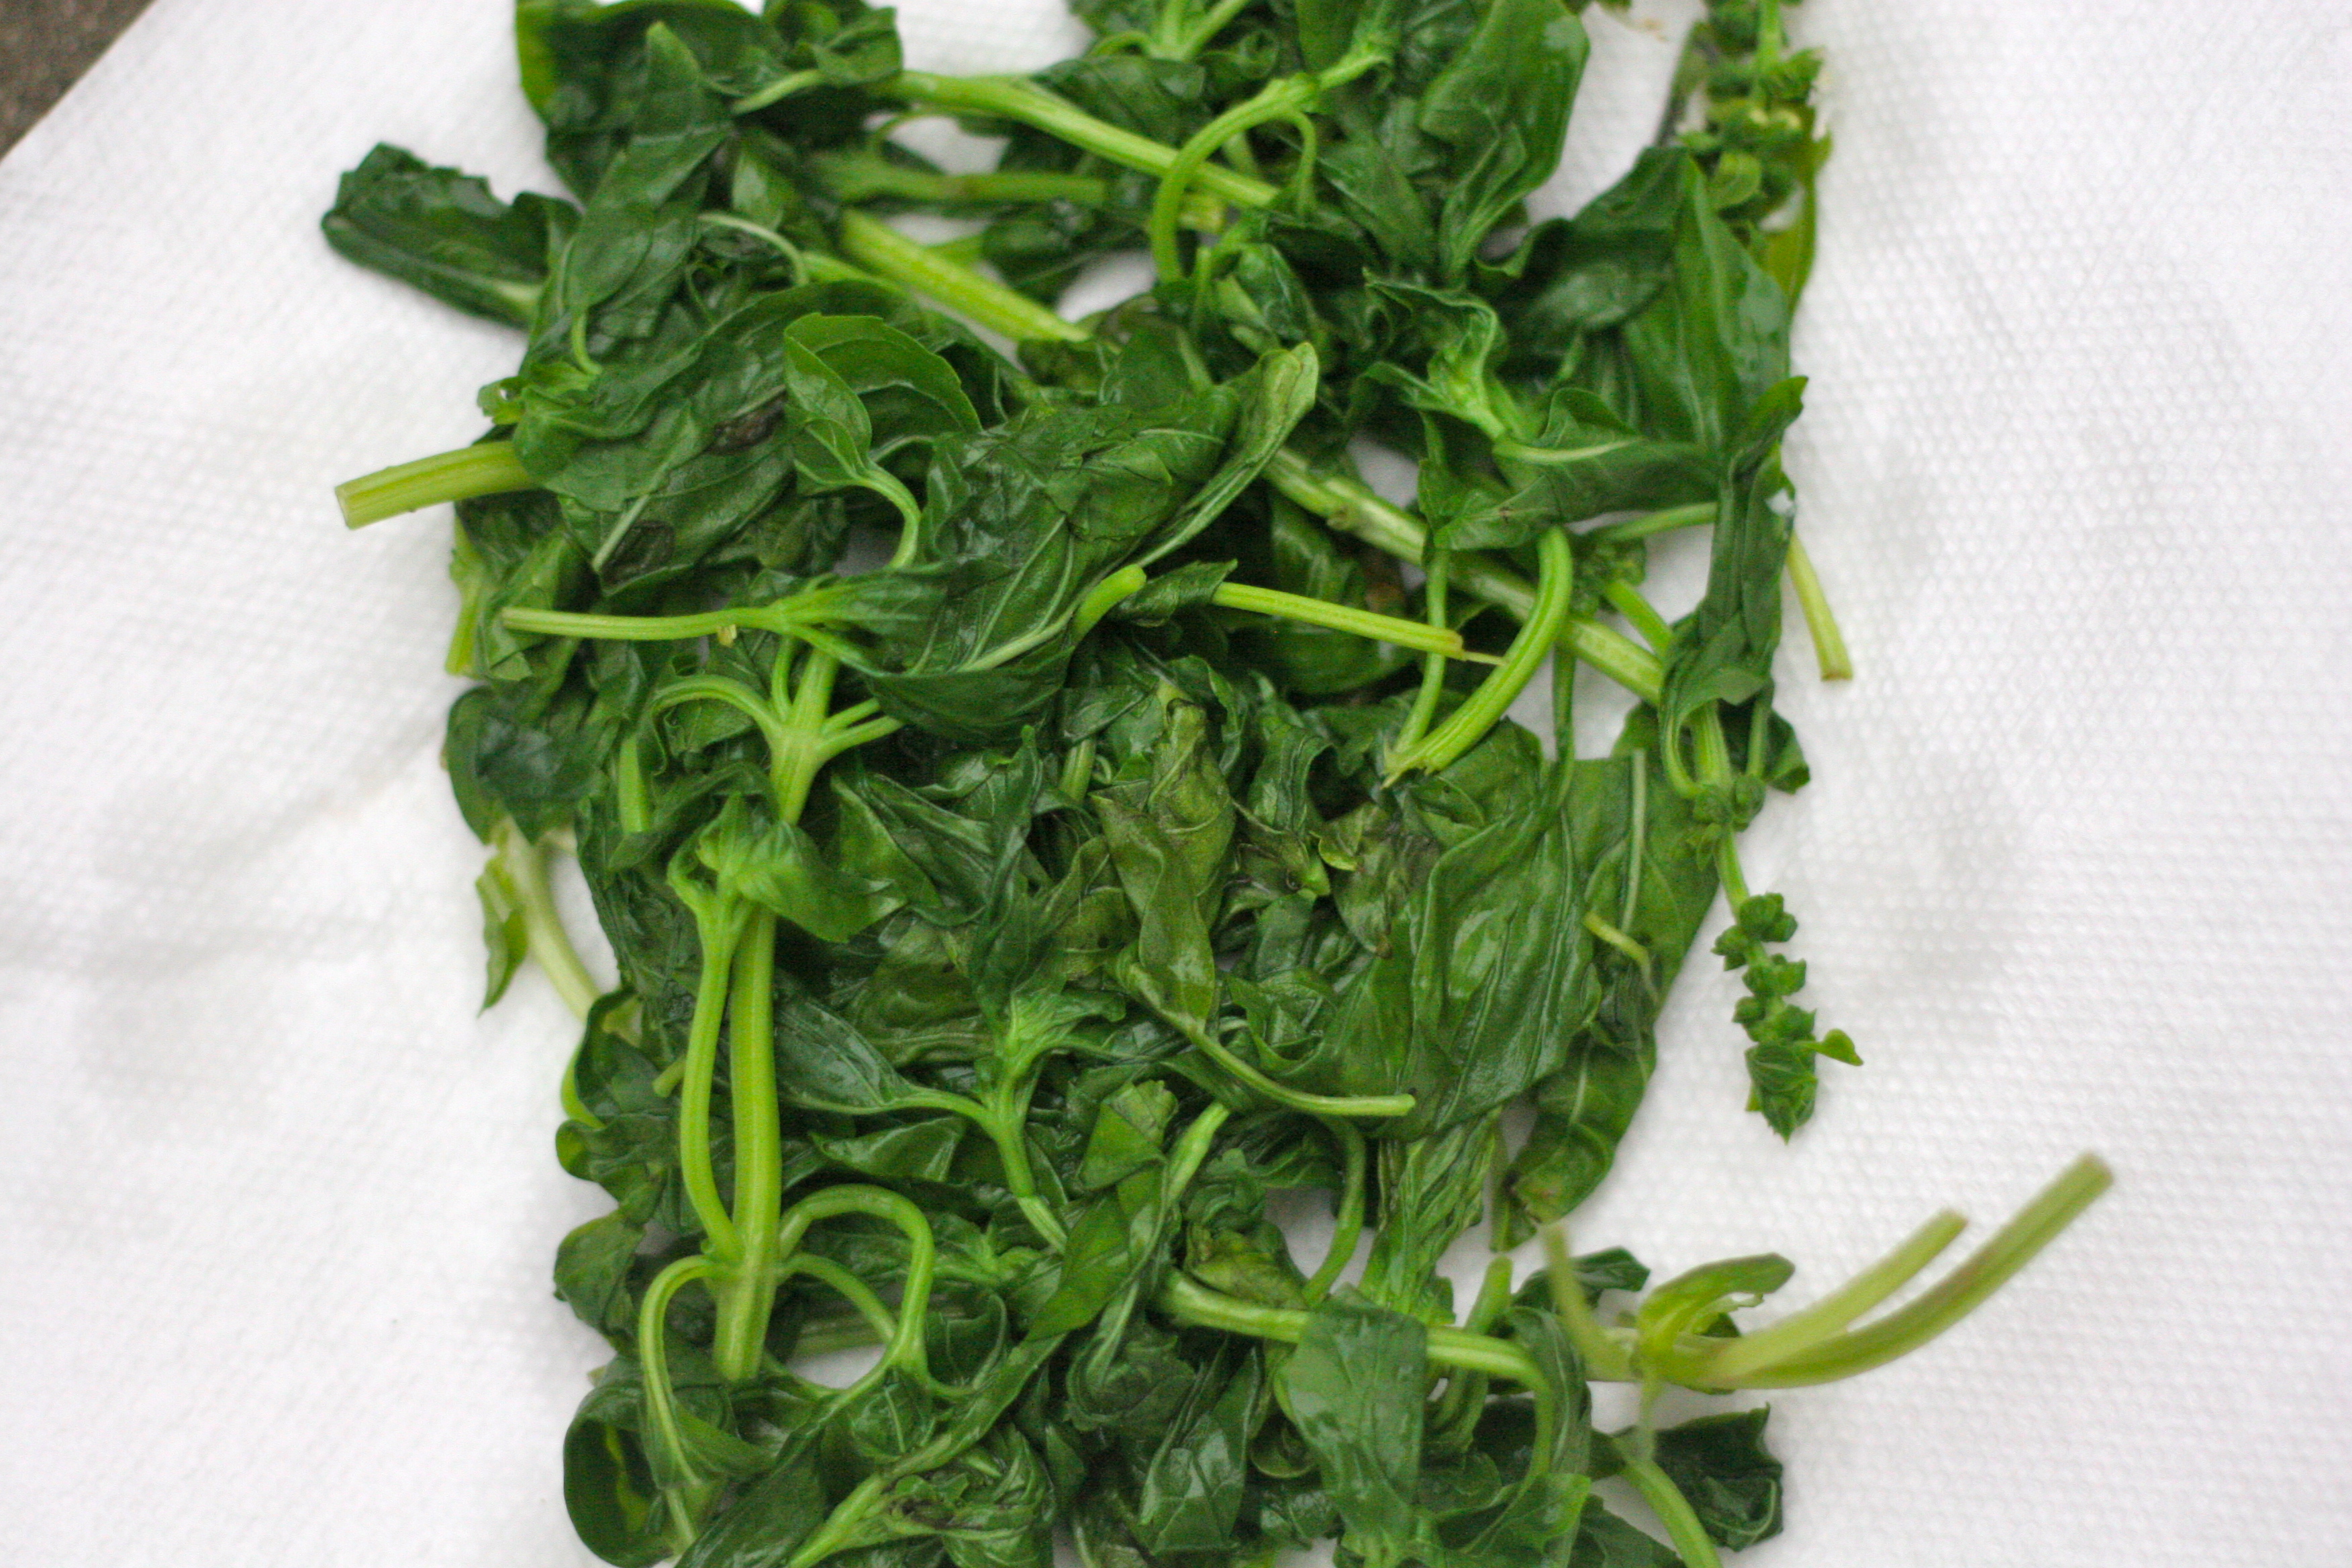 Blanched basil